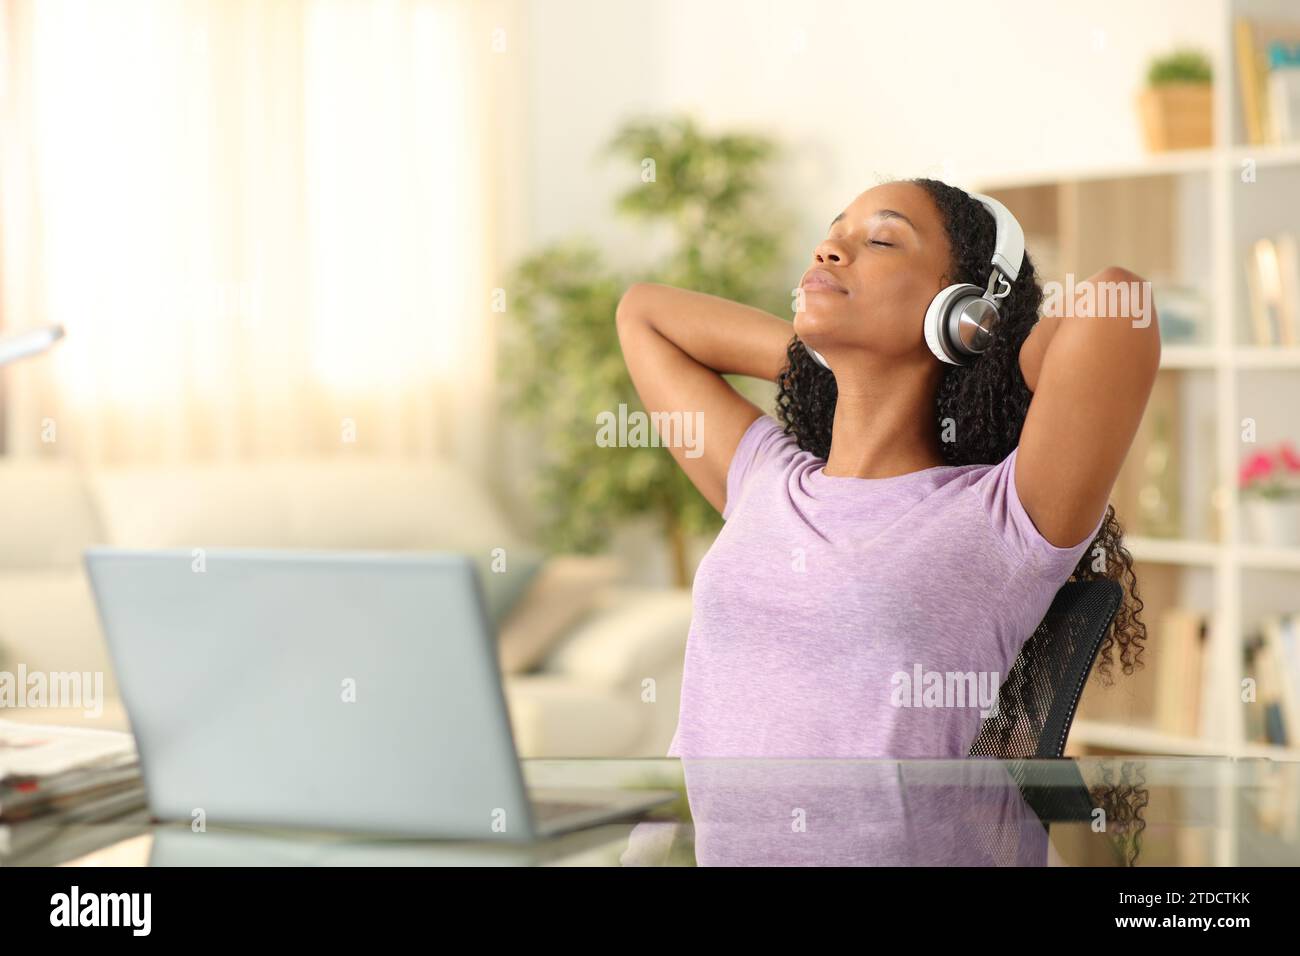 Black woman listening audio with headphone relaxing at home Stock Photo